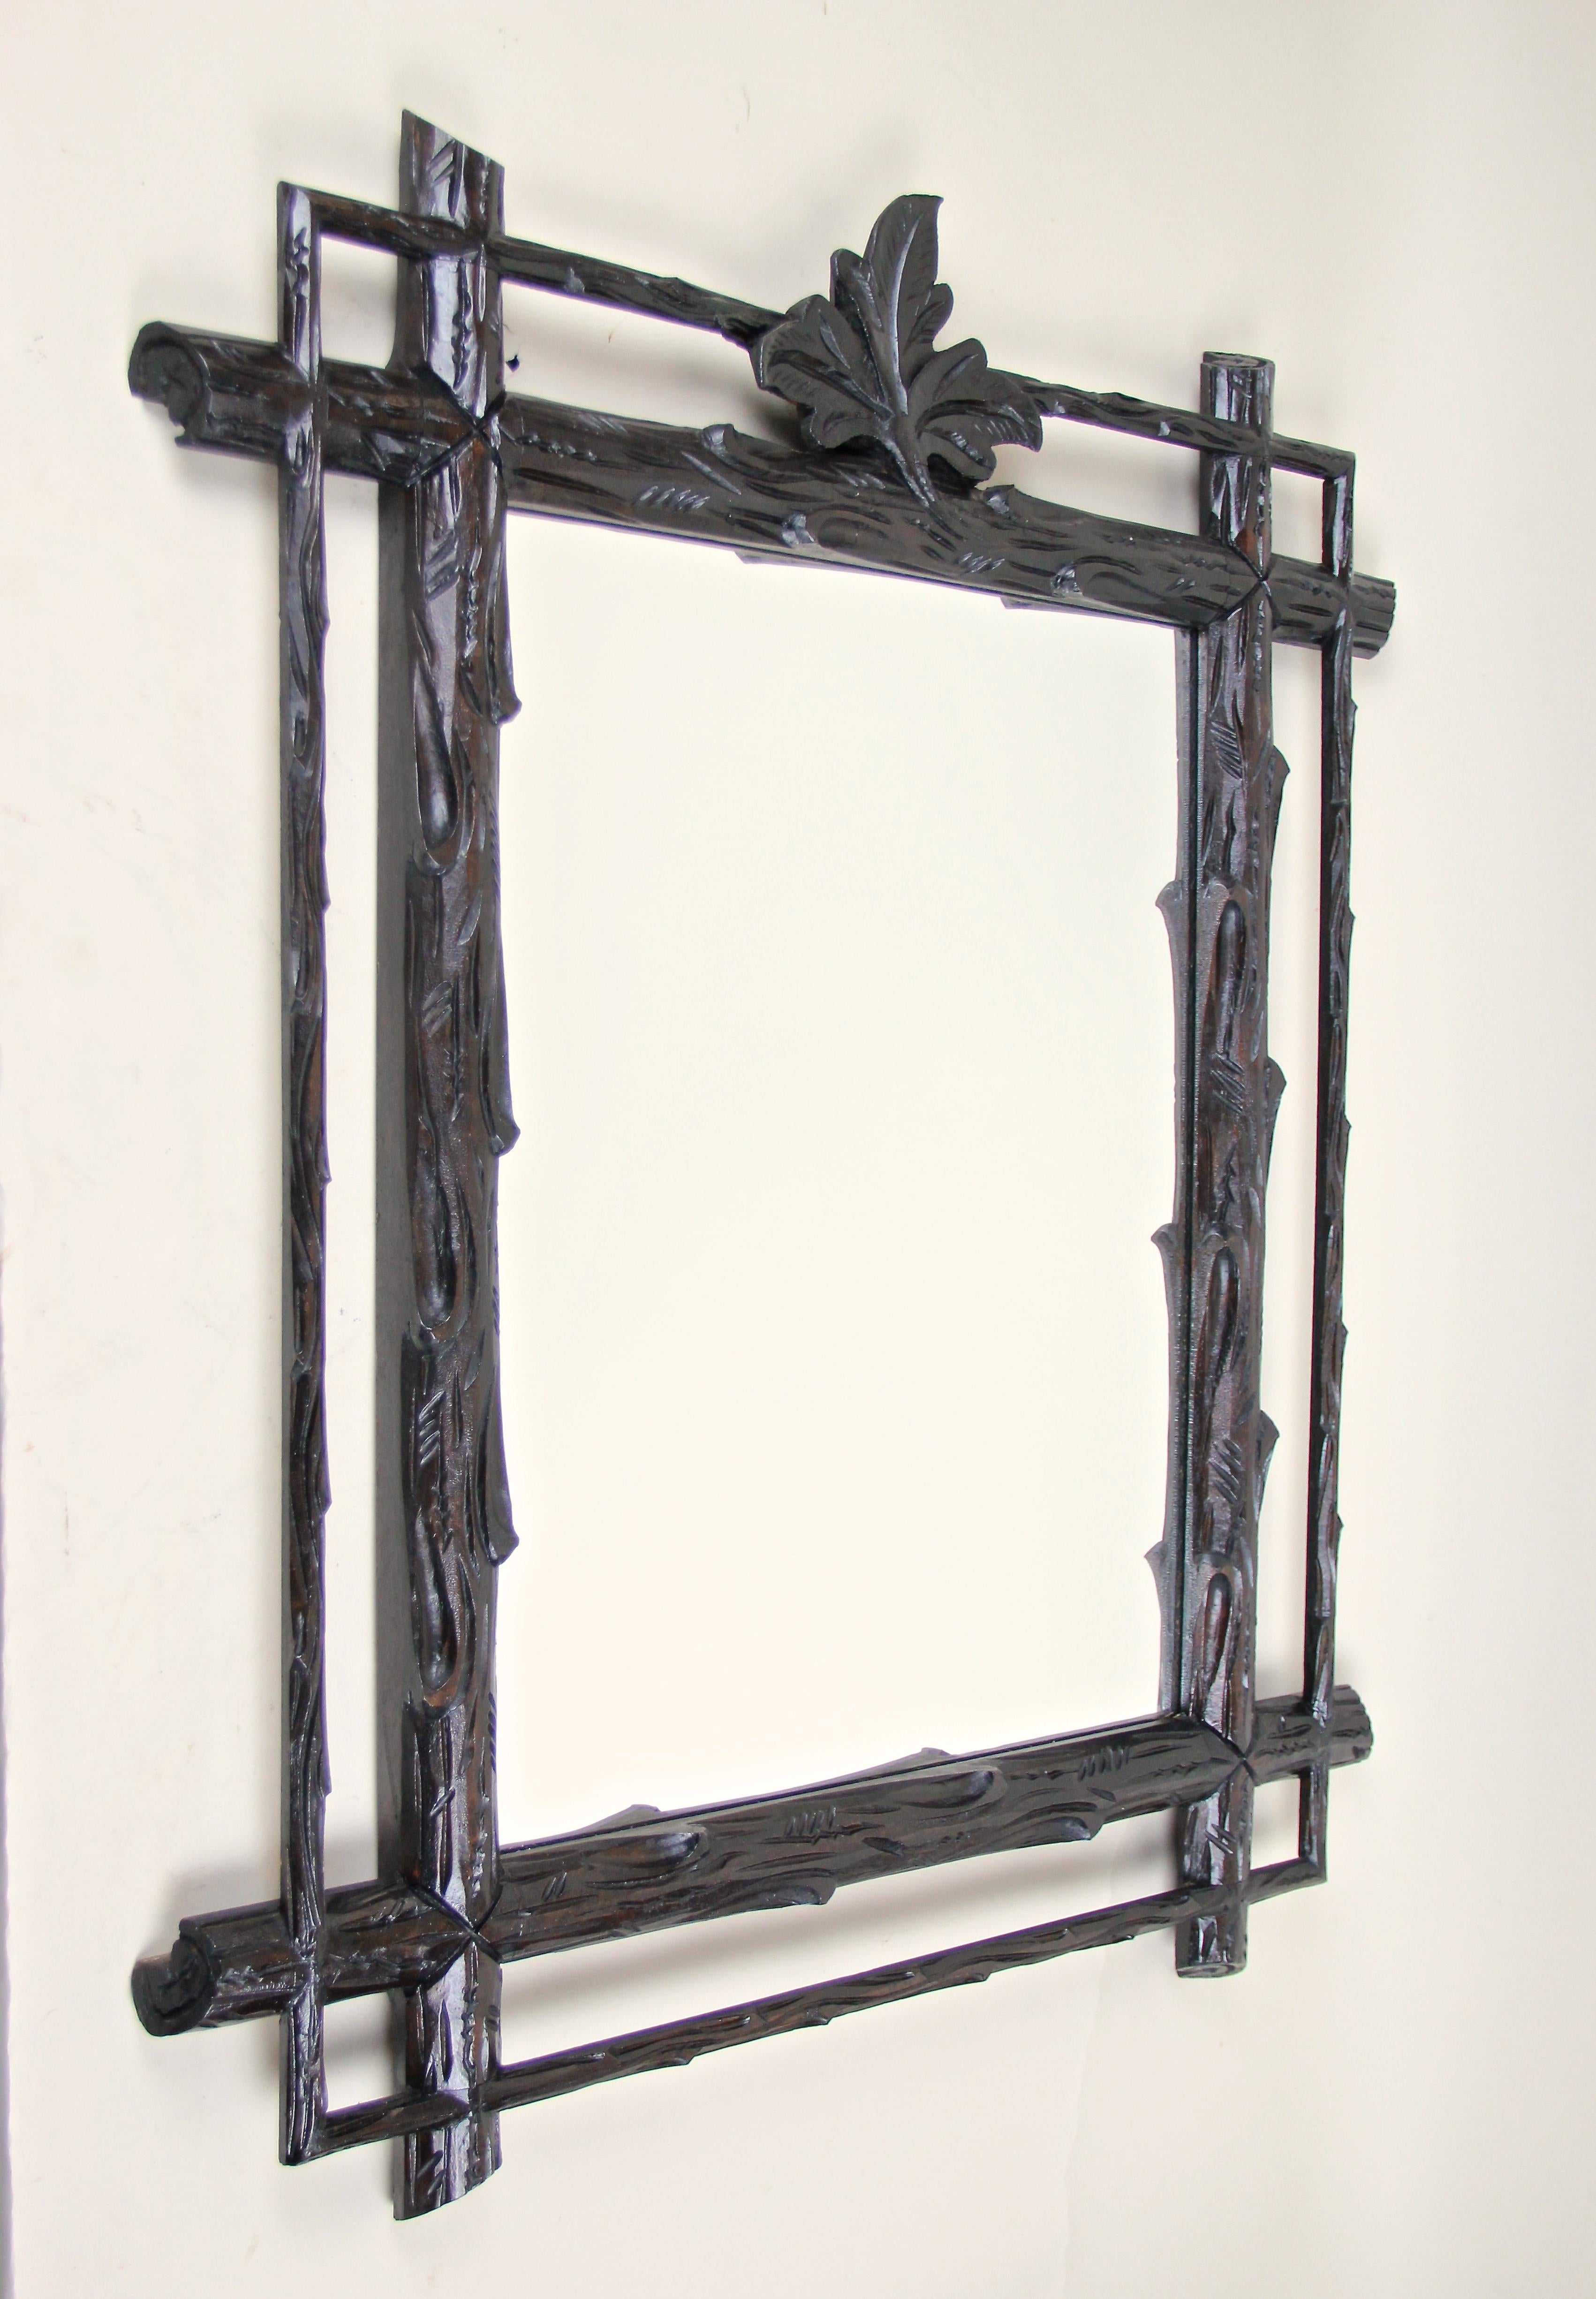 Mesmerizing rustic Black Forest wall mirror from the late 19th century out of Austria. Handcrafted out of fine basswood, this charming mirror shows an extrordinary rural design: a doubled frame in the manner of tree branches with protruding corners